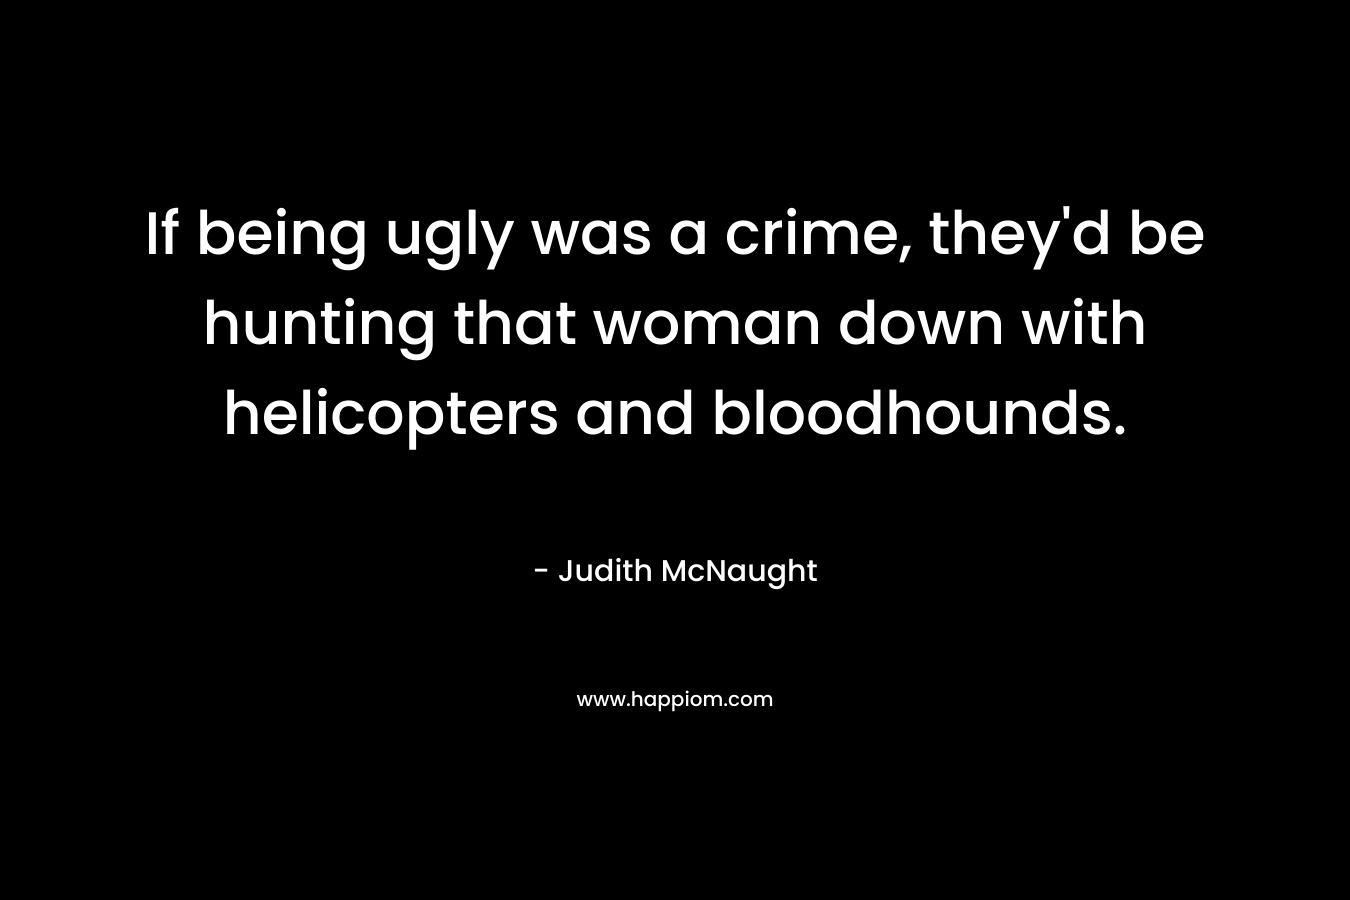 If being ugly was a crime, they'd be hunting that woman down with helicopters and bloodhounds.